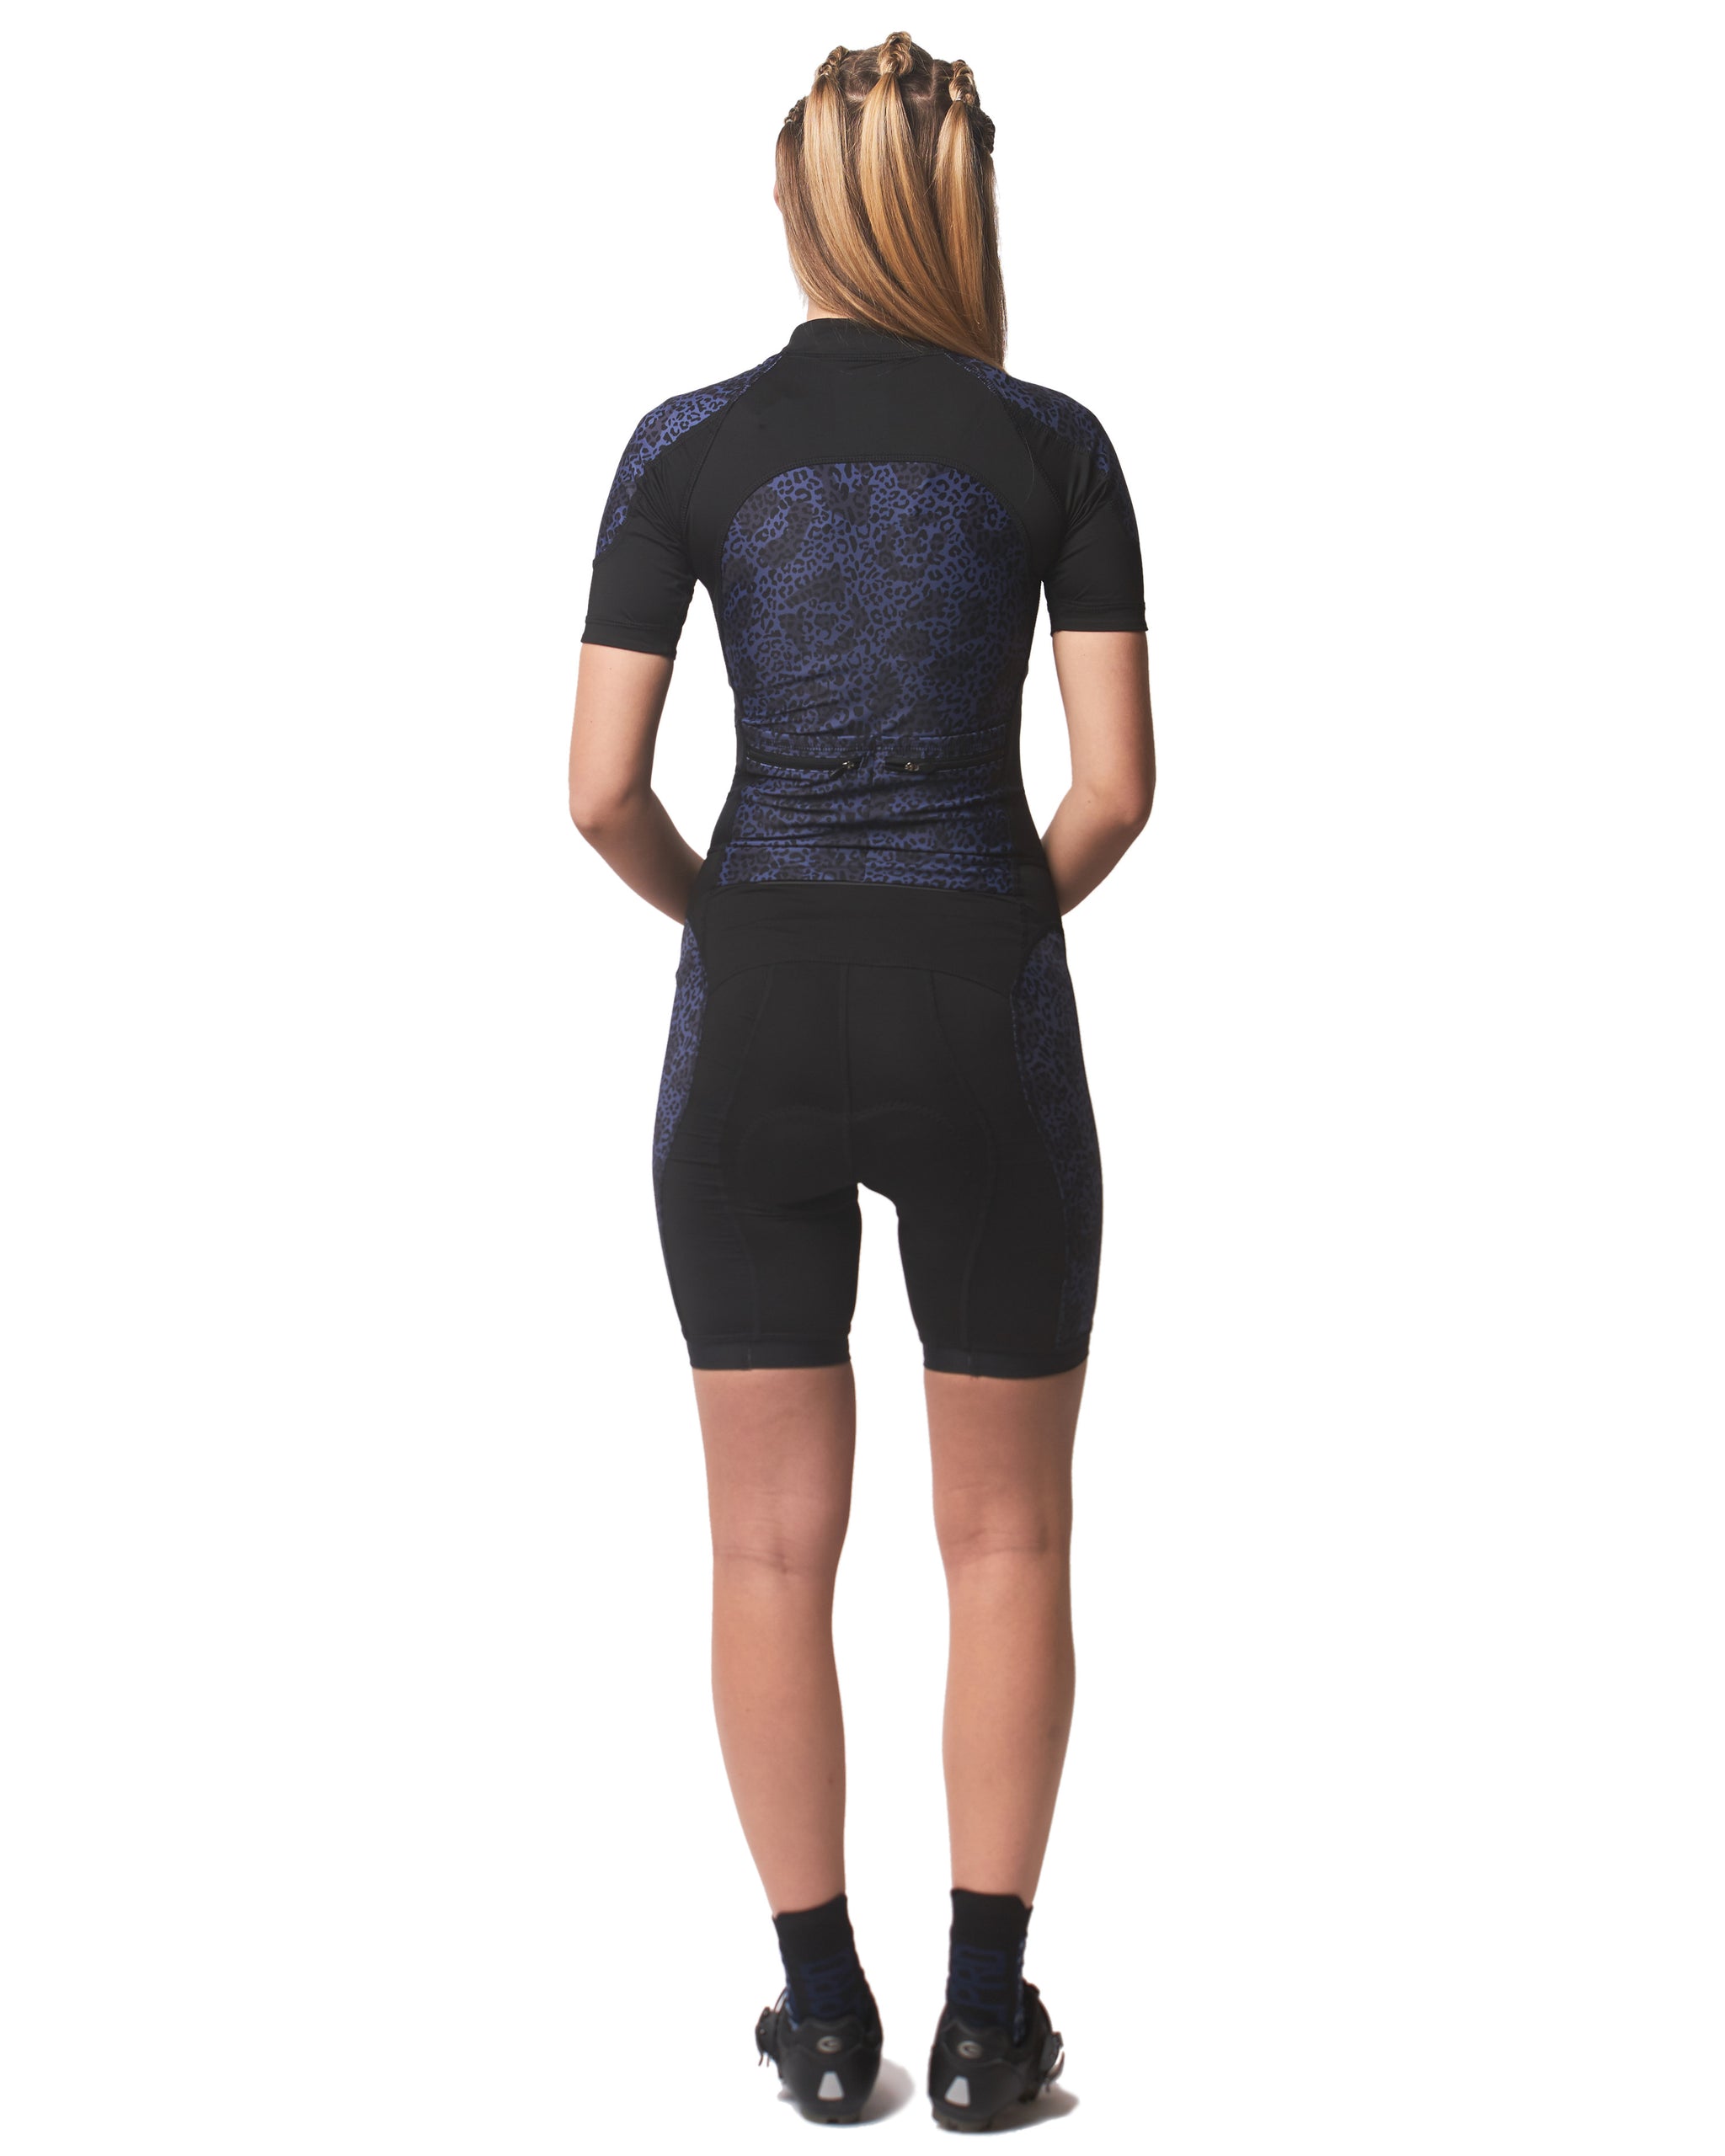 Cycling suit for women - Black and leopard print - Performance cycling ...